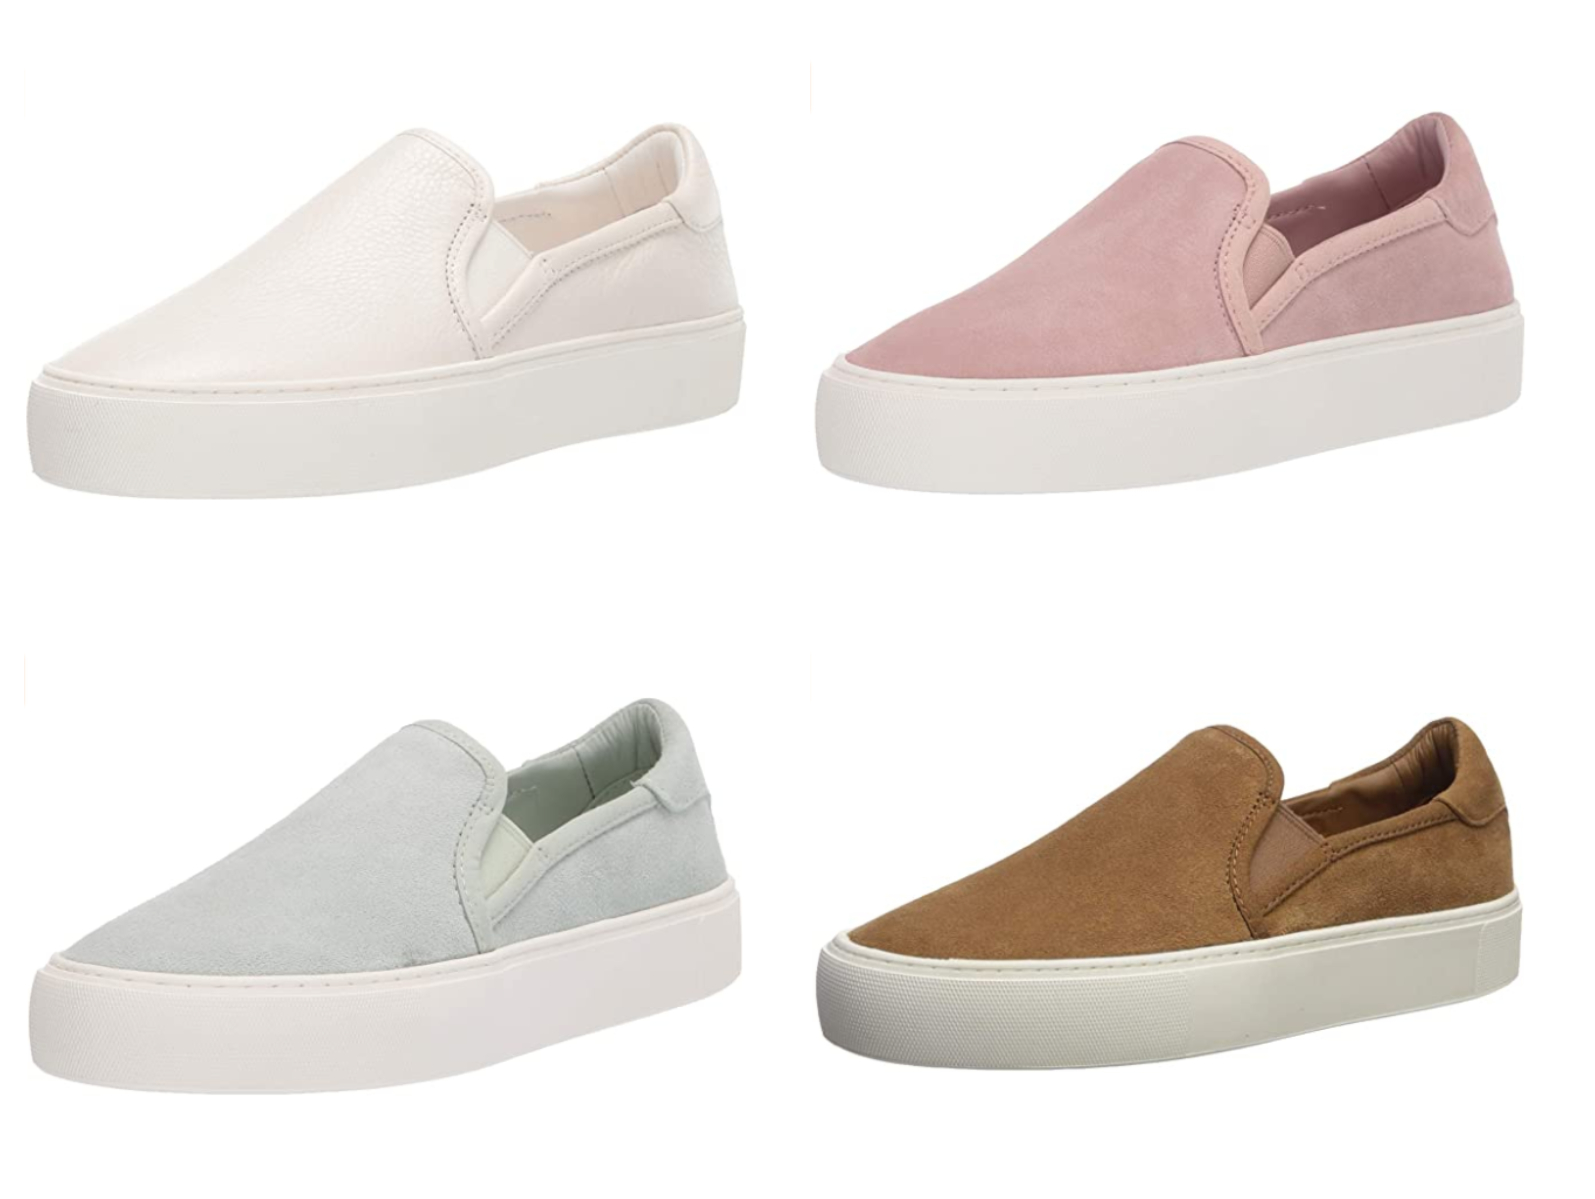 UGG Women’s Jass Sneakers for Only $35.99-$36.99 Shipped (Was $99.95 ...